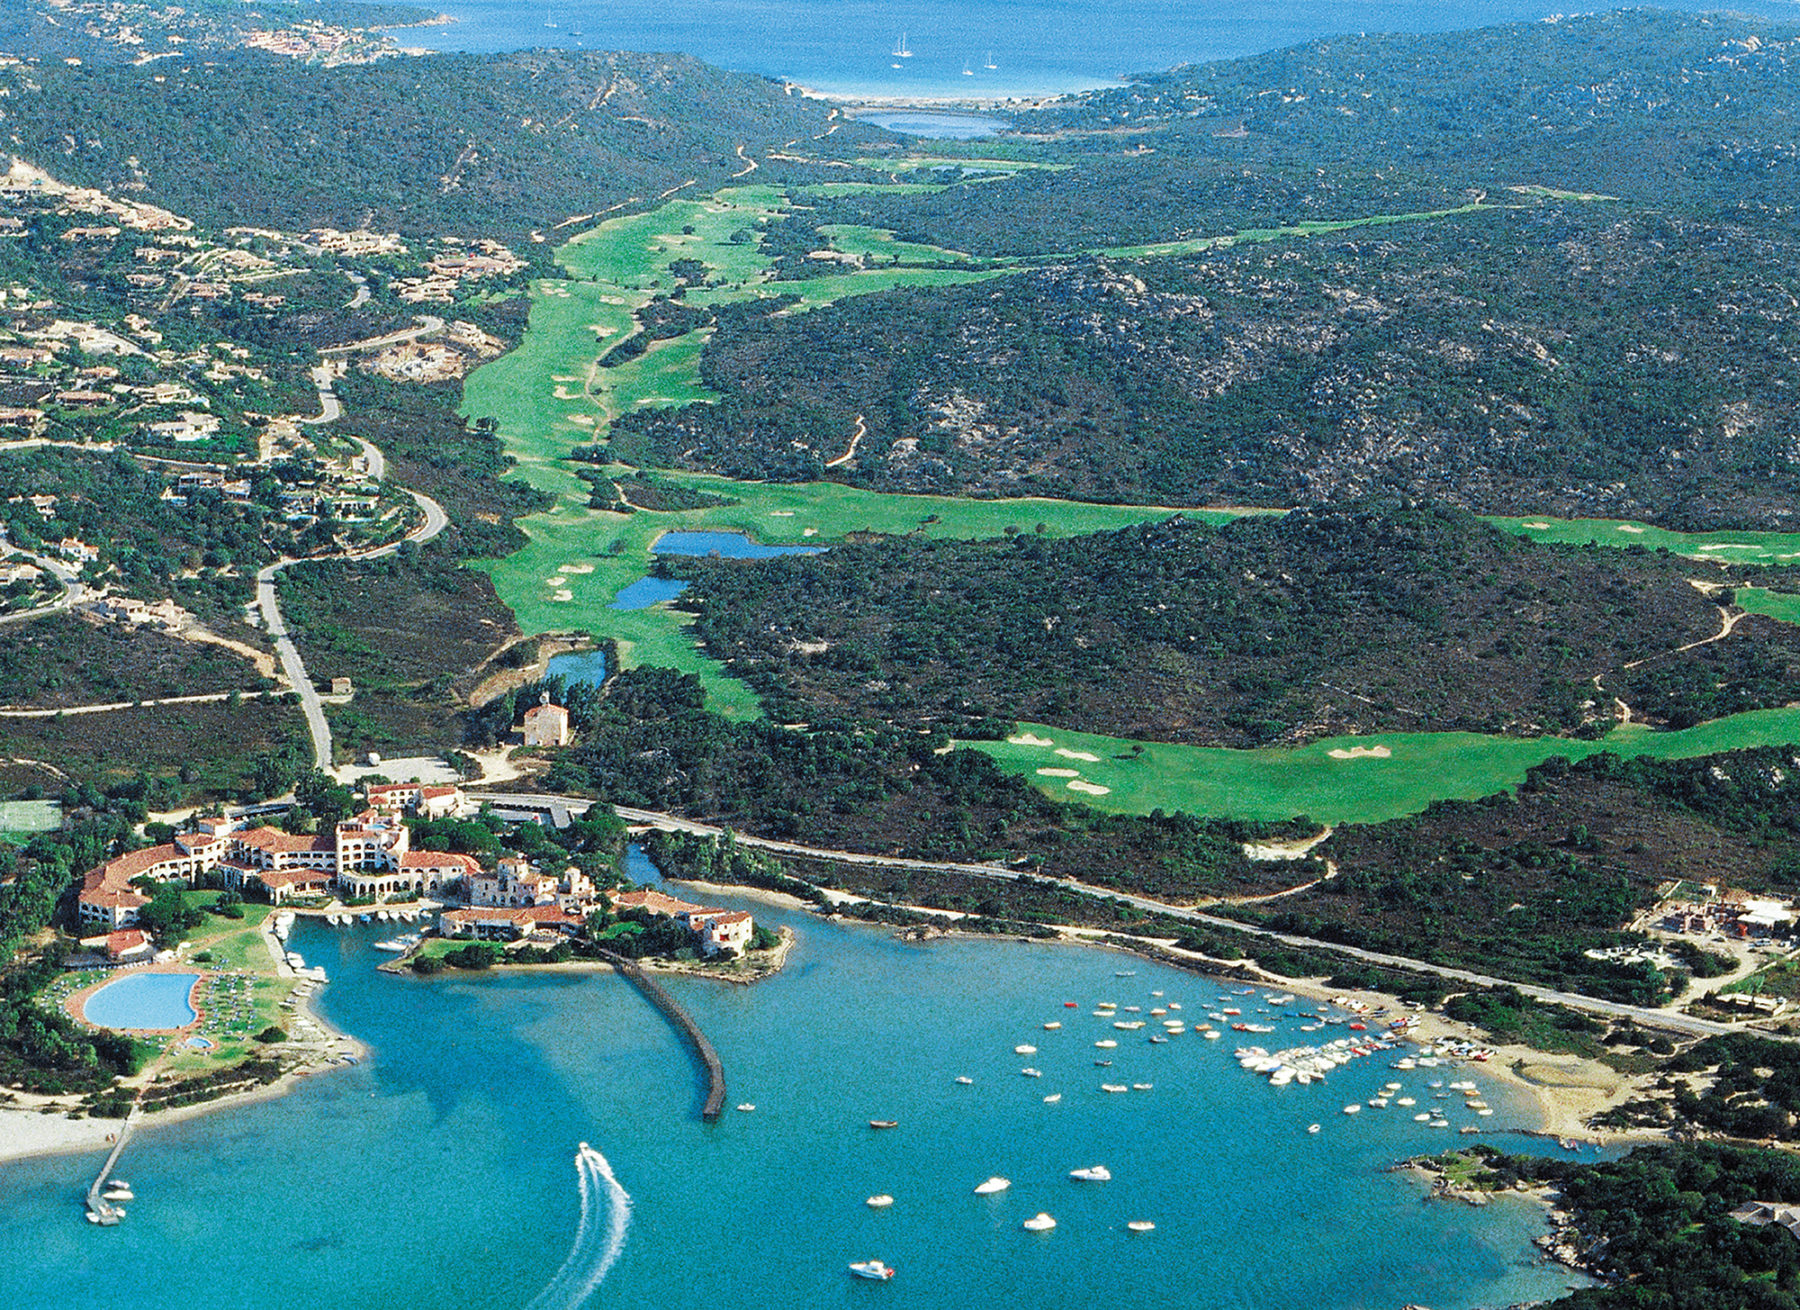 Aerial view of the resort development with the waterfront